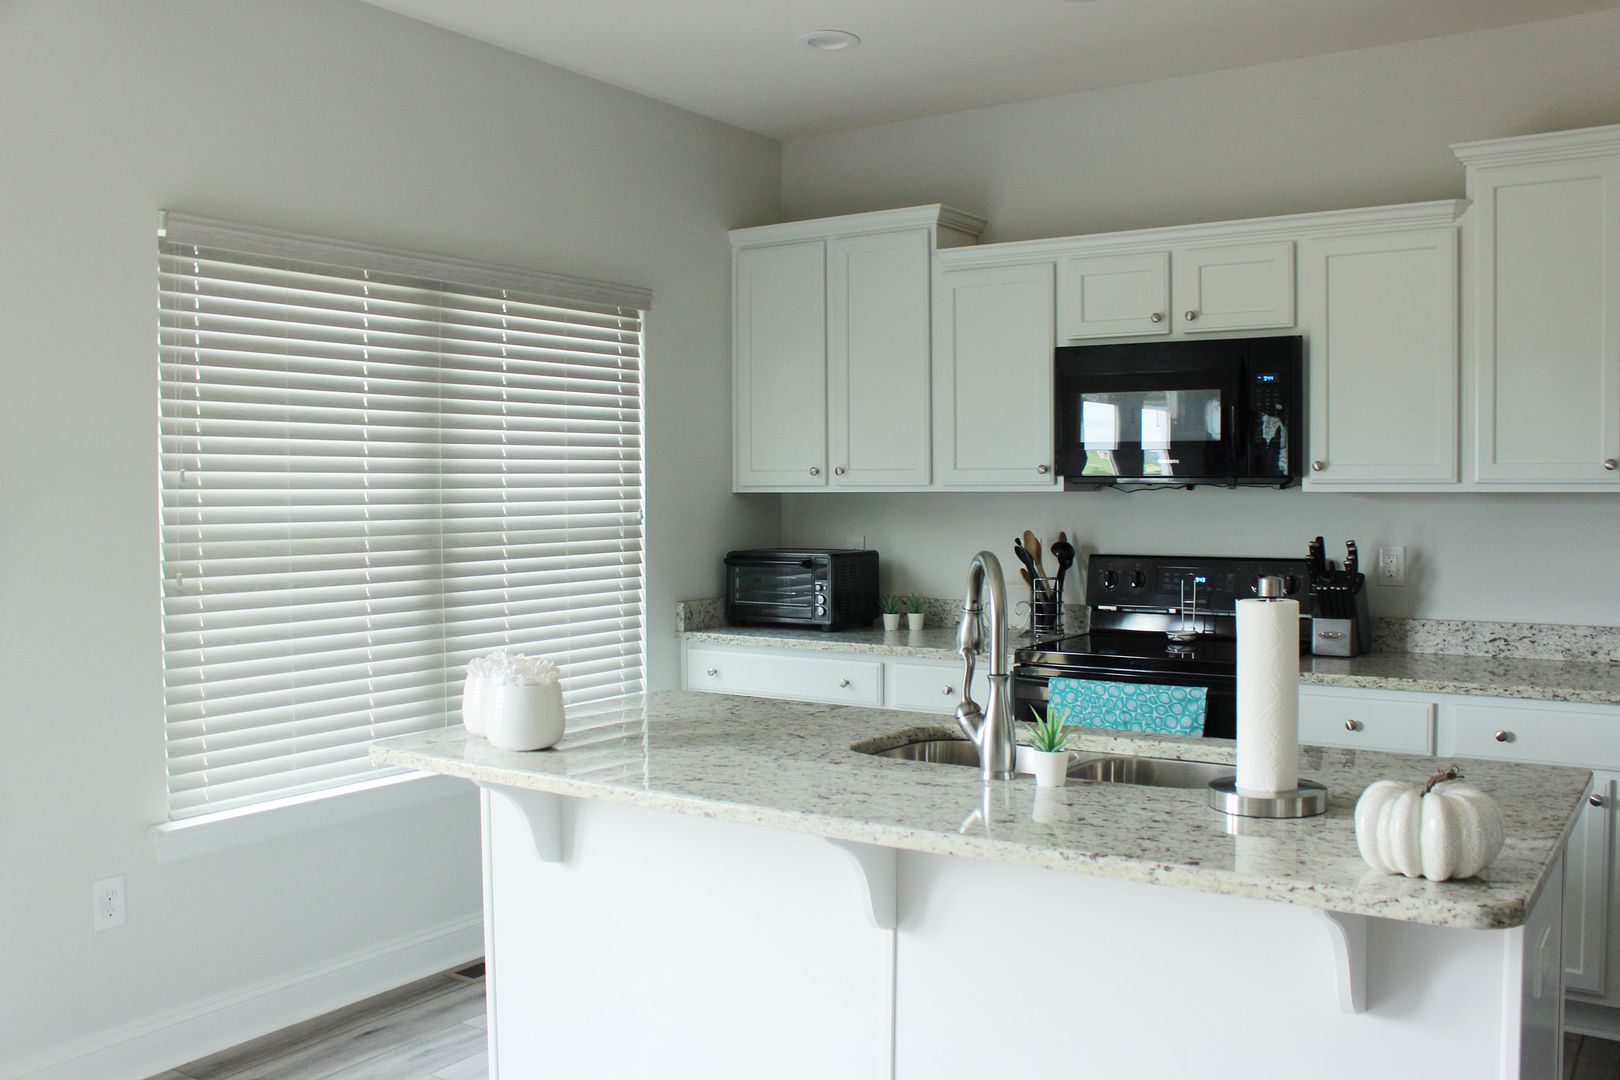 Comfortex Aria Faux Wood Blinds in Kitchen